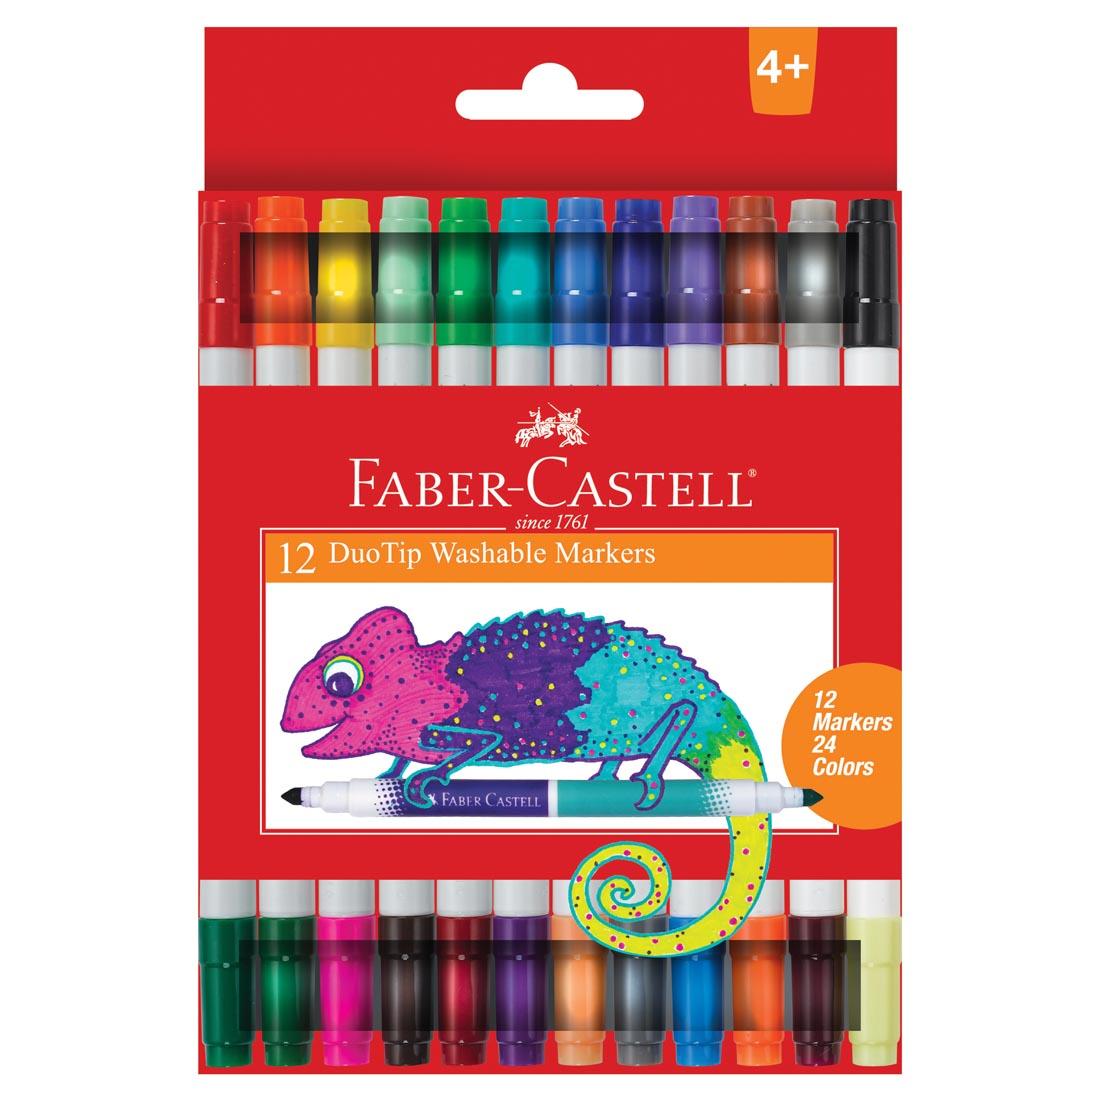 Faber-Castell DuoTip Washable Markers 12-Count Set